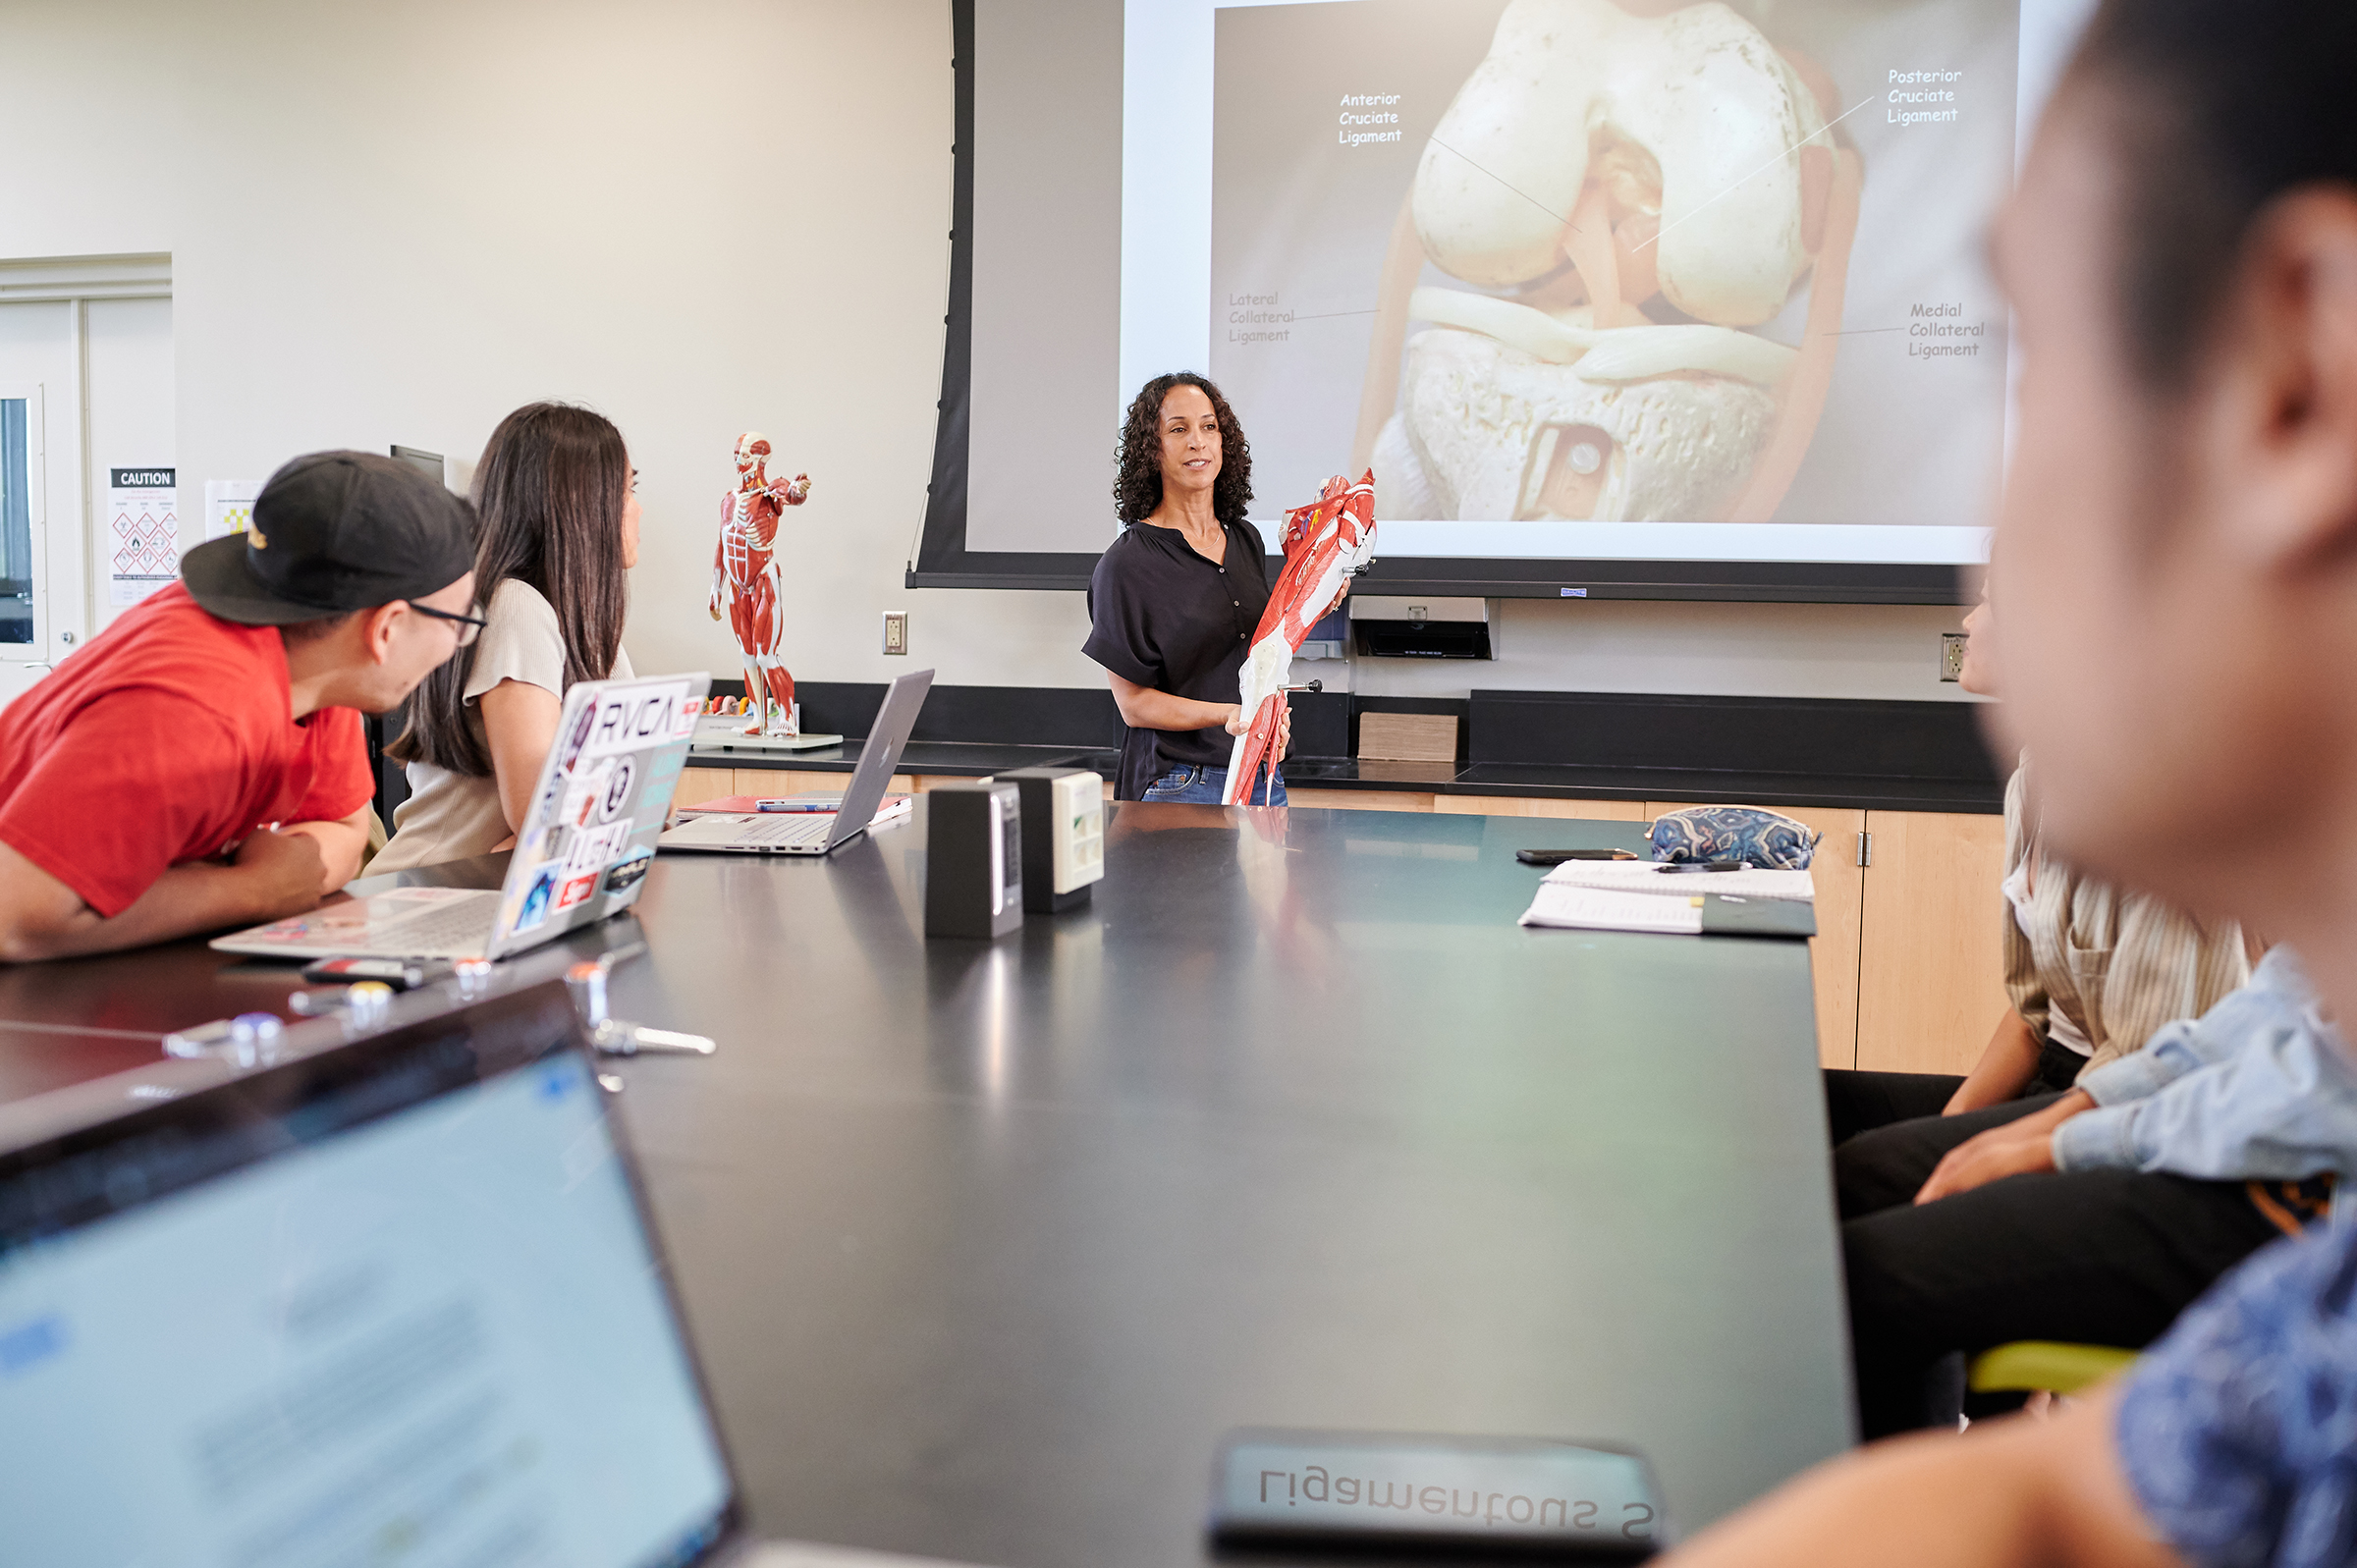 Photo of a professor in a classroom and students listening to her. The professor is holding what appears to be a model of the human leg and on the screen behind her is a diagram of a human leg